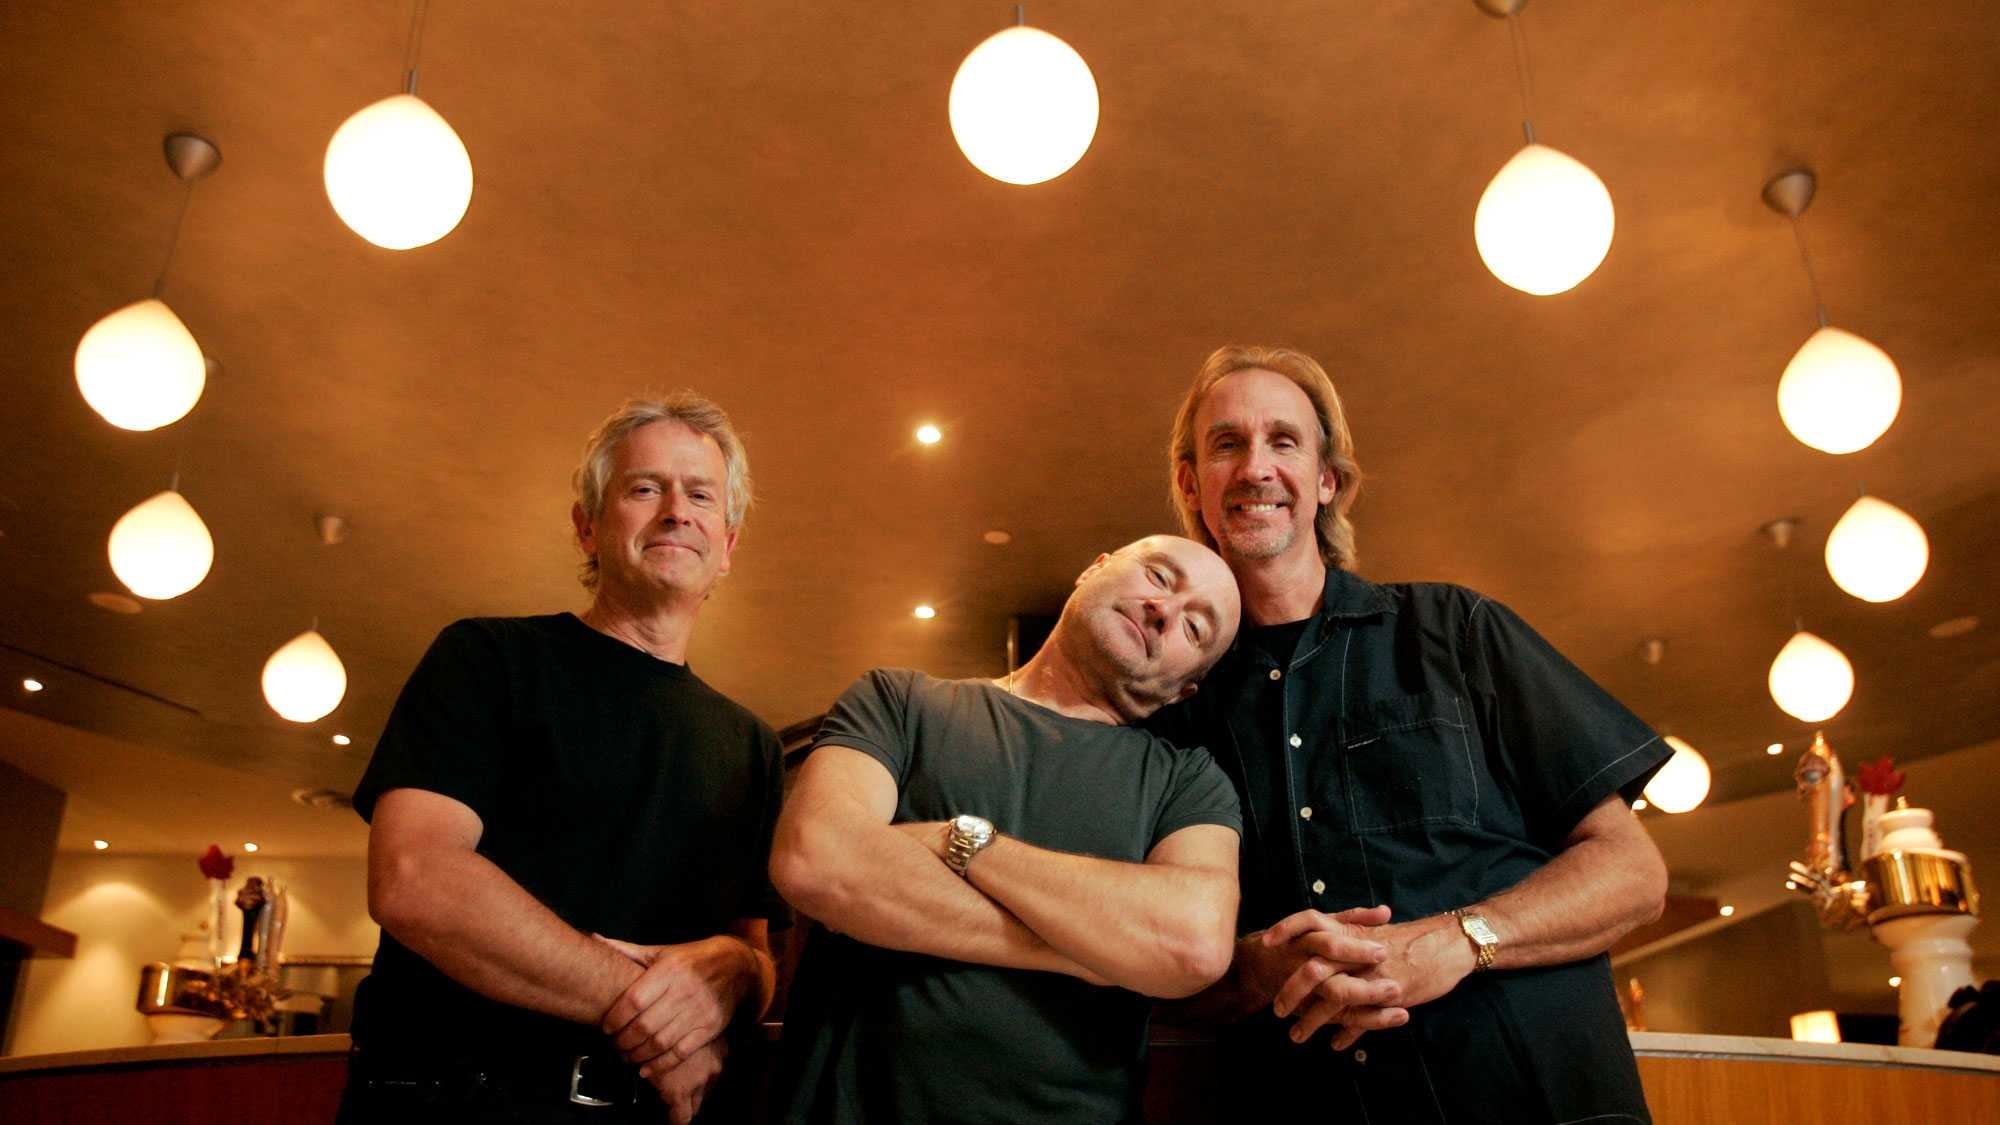 Rock band Genesis to reunite and tour for first time in 13 years 2000x1130